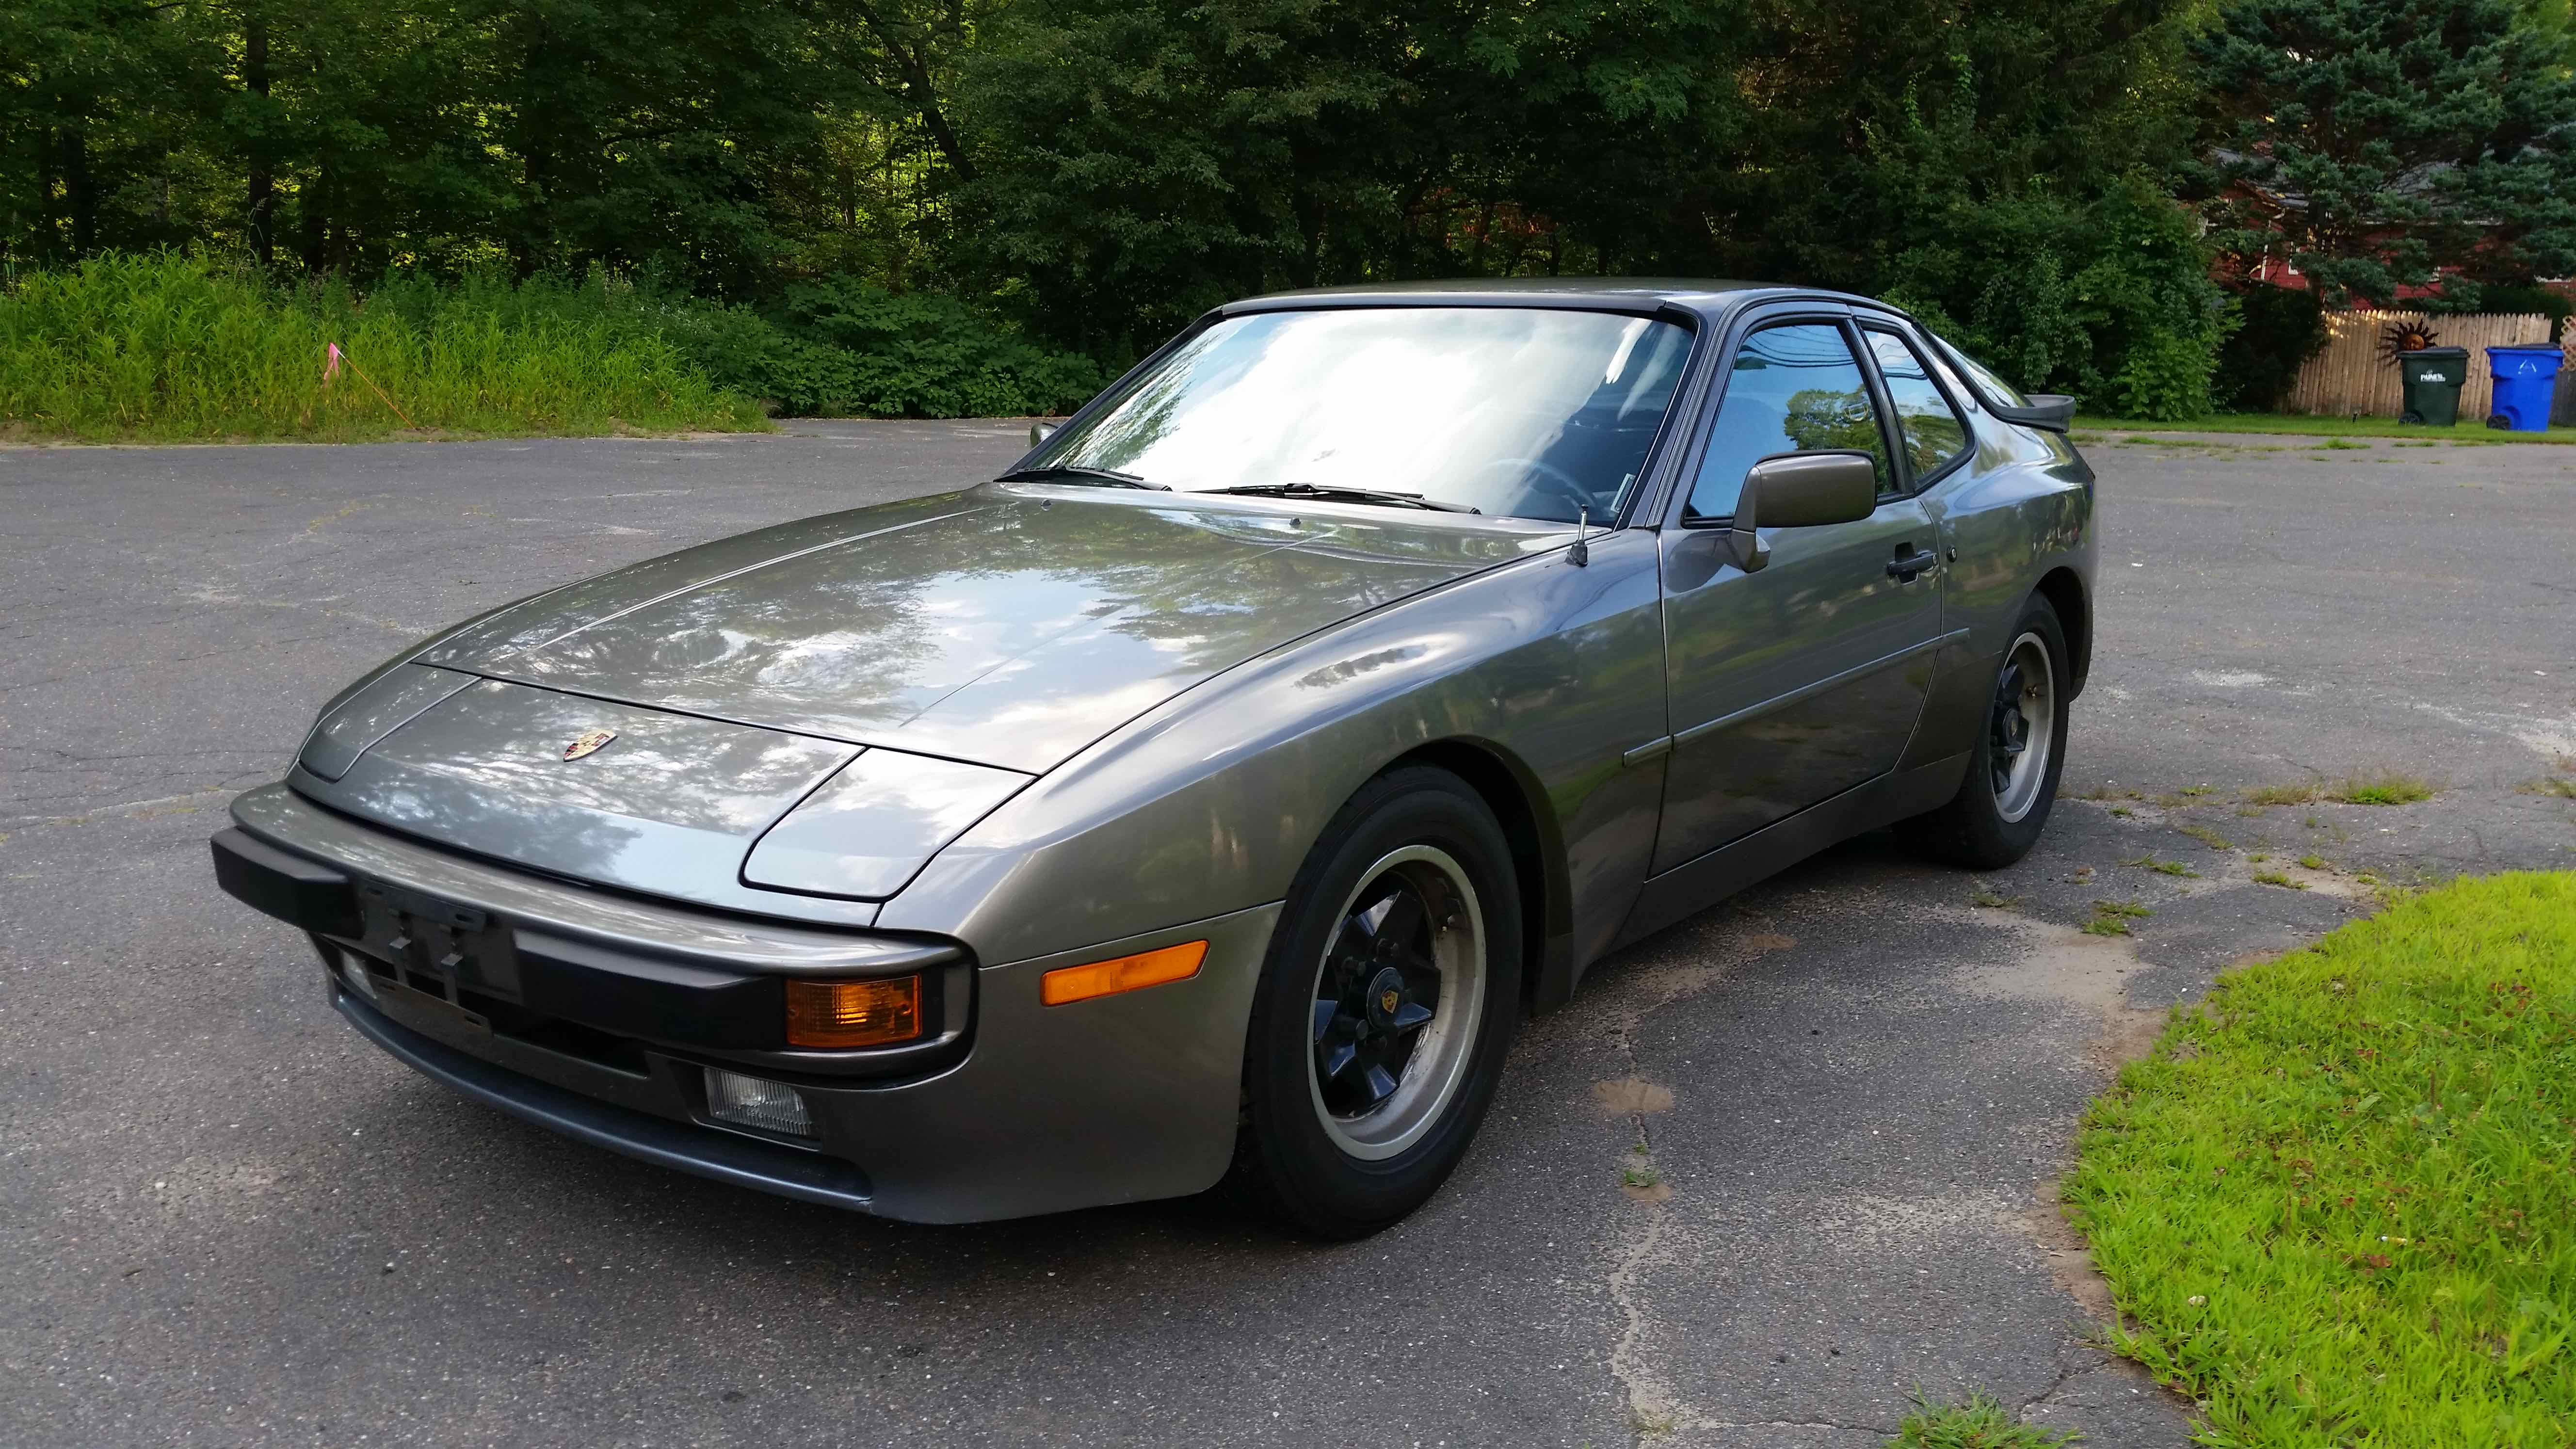 The 33-year-old 944 is ready to roll, coast to coast | Andy Reid photos